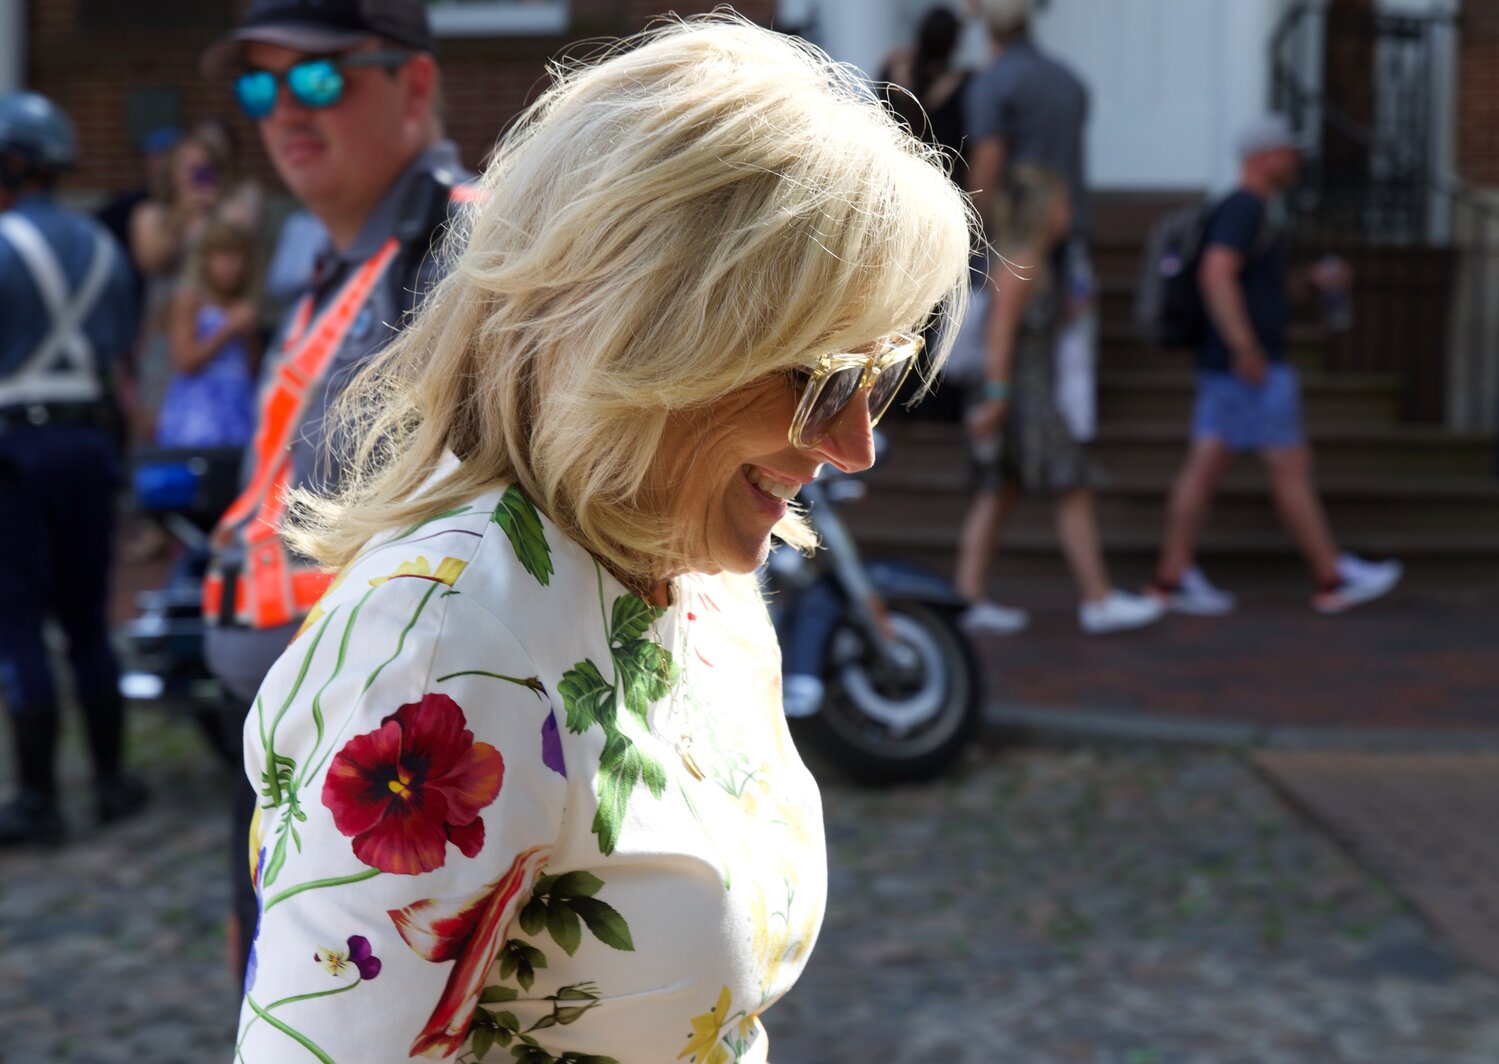 First lady Jill Biden during her visit to downtown Nantucket Saturday.